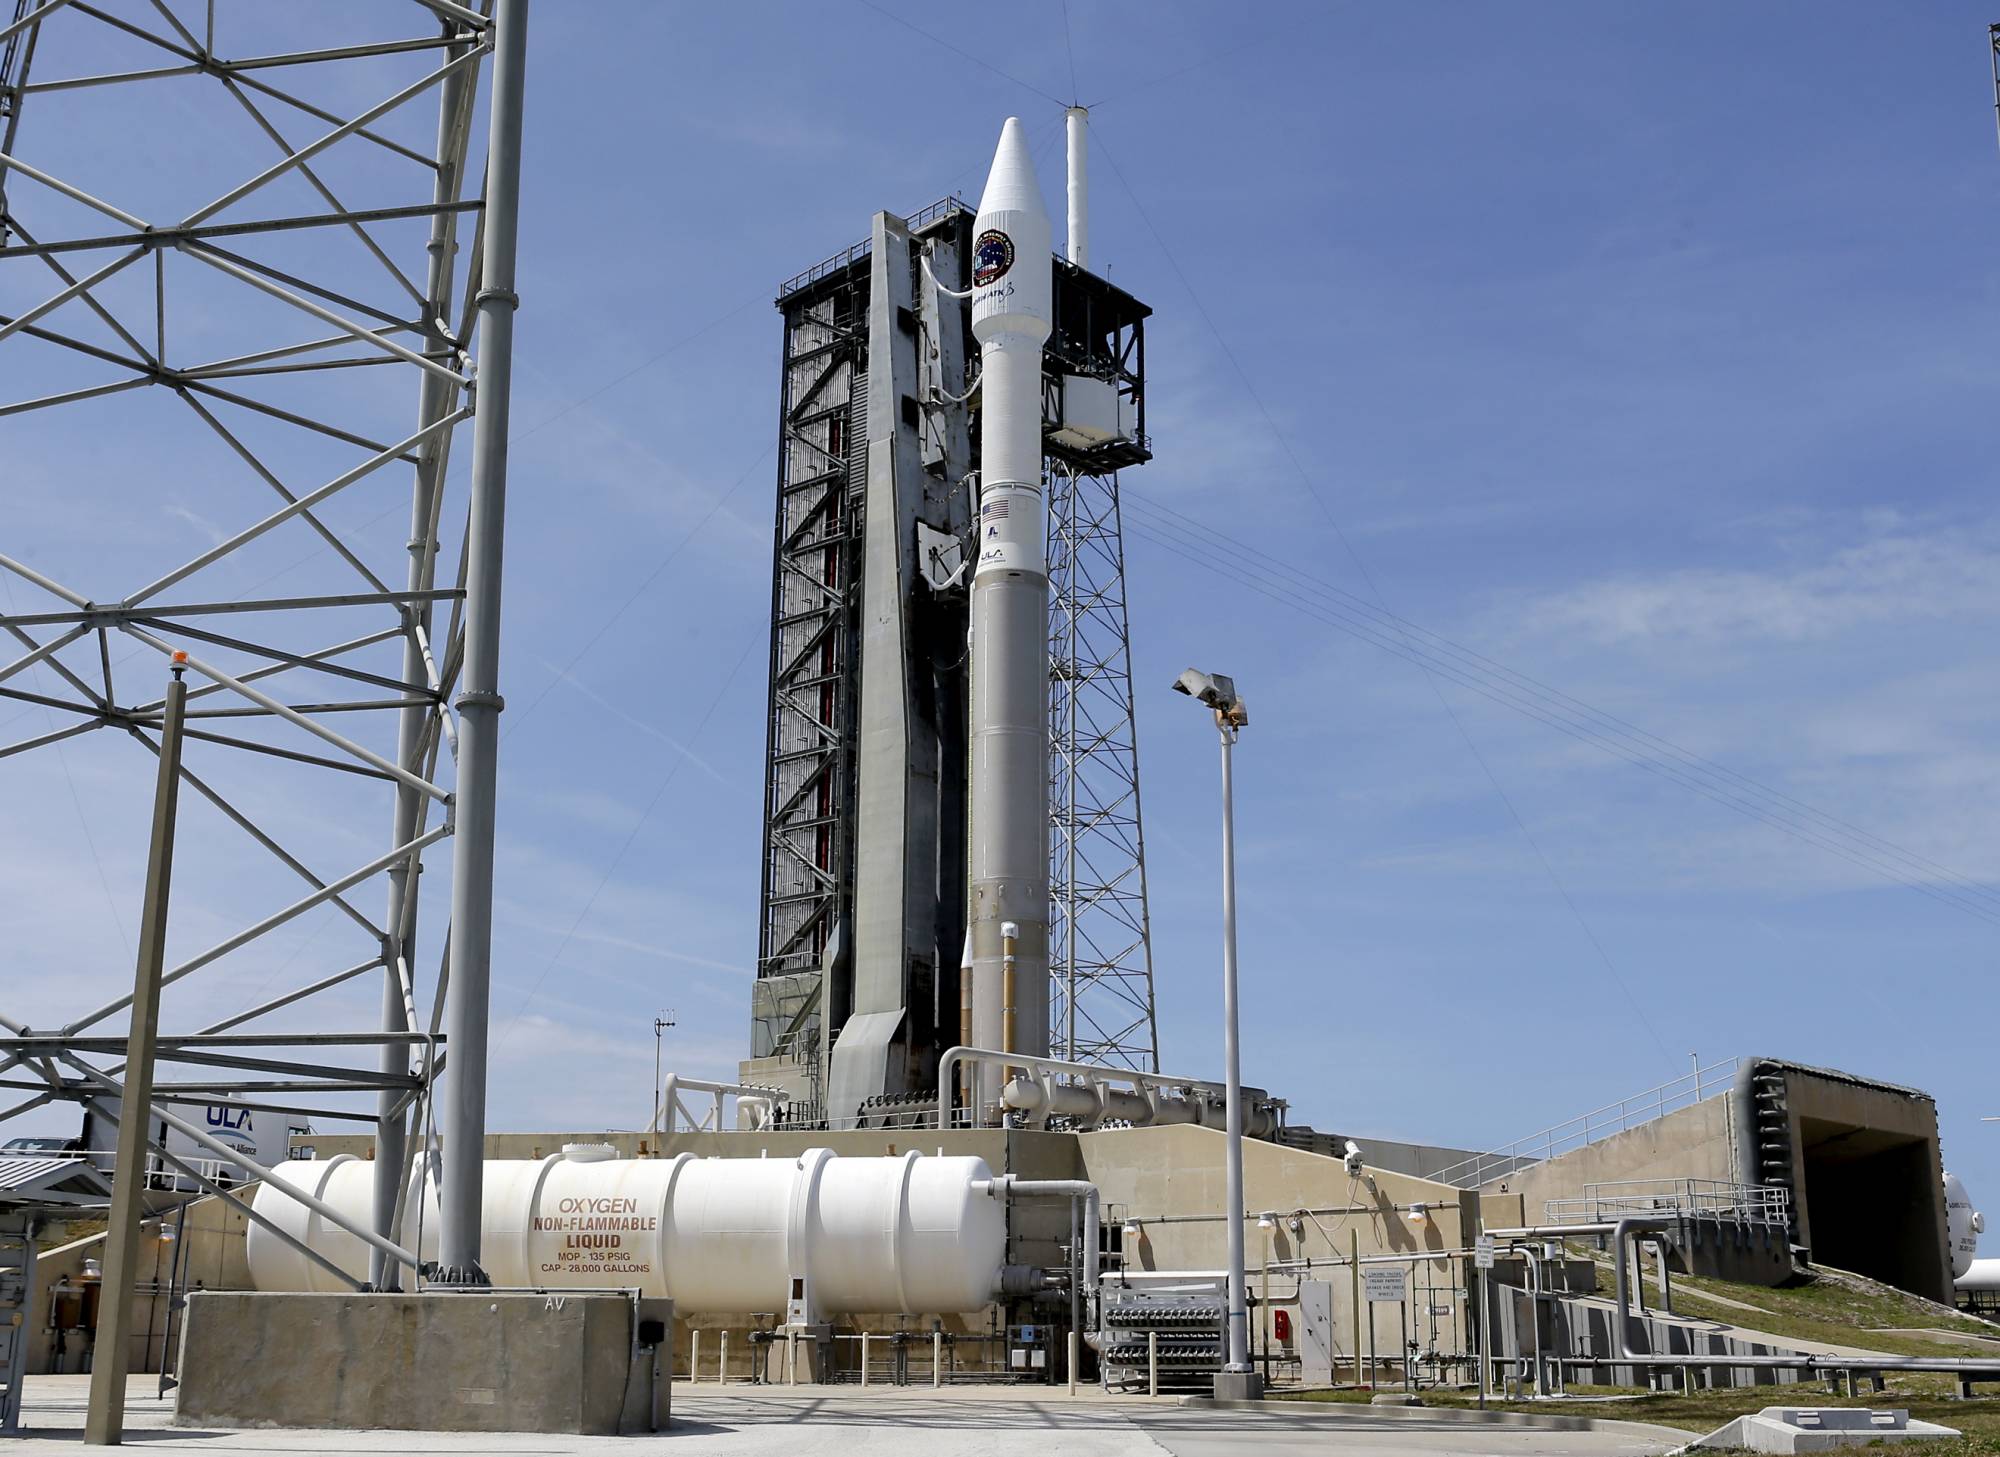 A United Launch Alliance Atlas V rocket that will carry supplies to the International Space Station stands ready at complex 41 at the Cape Canaveral Air Force Station, Monday, April 17, 2017, in Cape Canaveral, Fla. The launch is scheduled for Tuesday morning and for the first time, NASA cameras will provide live 360-degree video of the rocket heading toward space. (AP Photo/John Raoux)